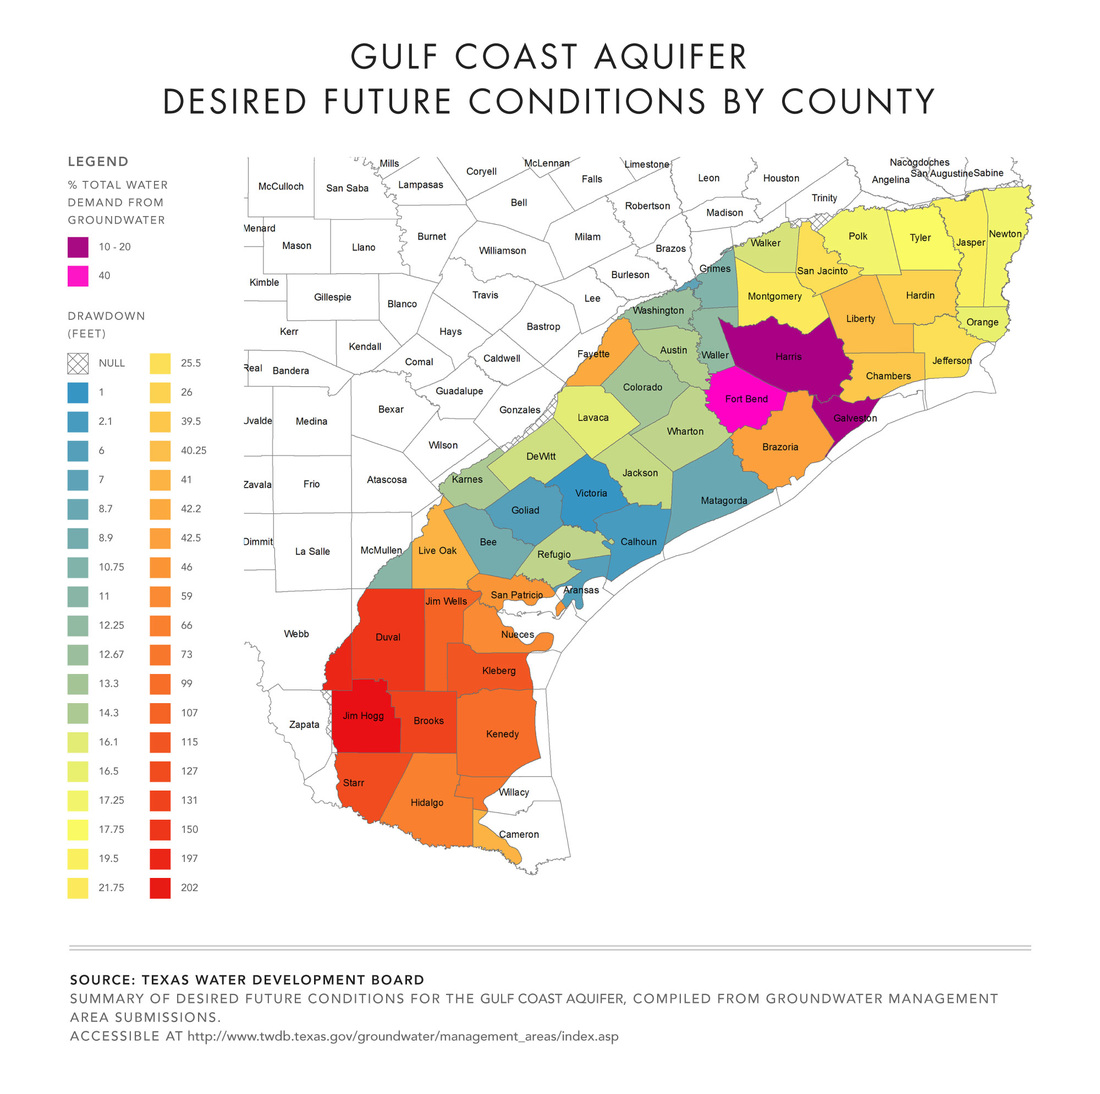 Gulf Coast Aquifer Desired Future Conditions by County